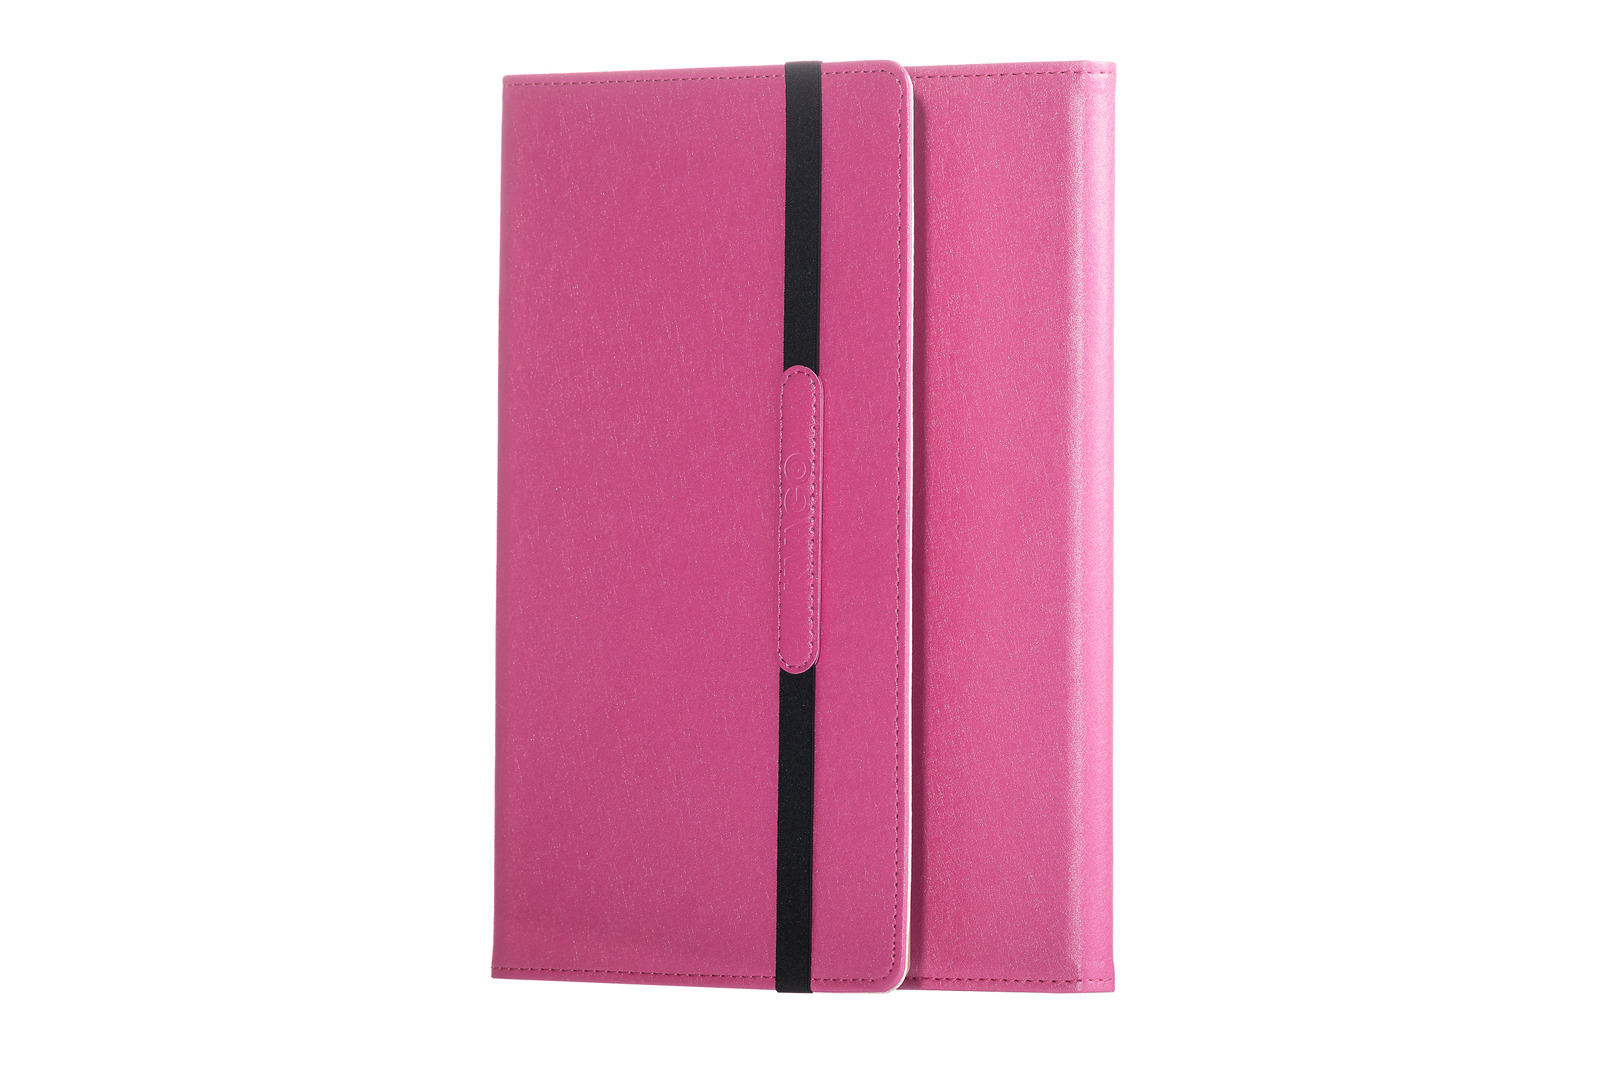 KVAGO Leather Case for iPad Air 2 + Stylus + Screen Protector